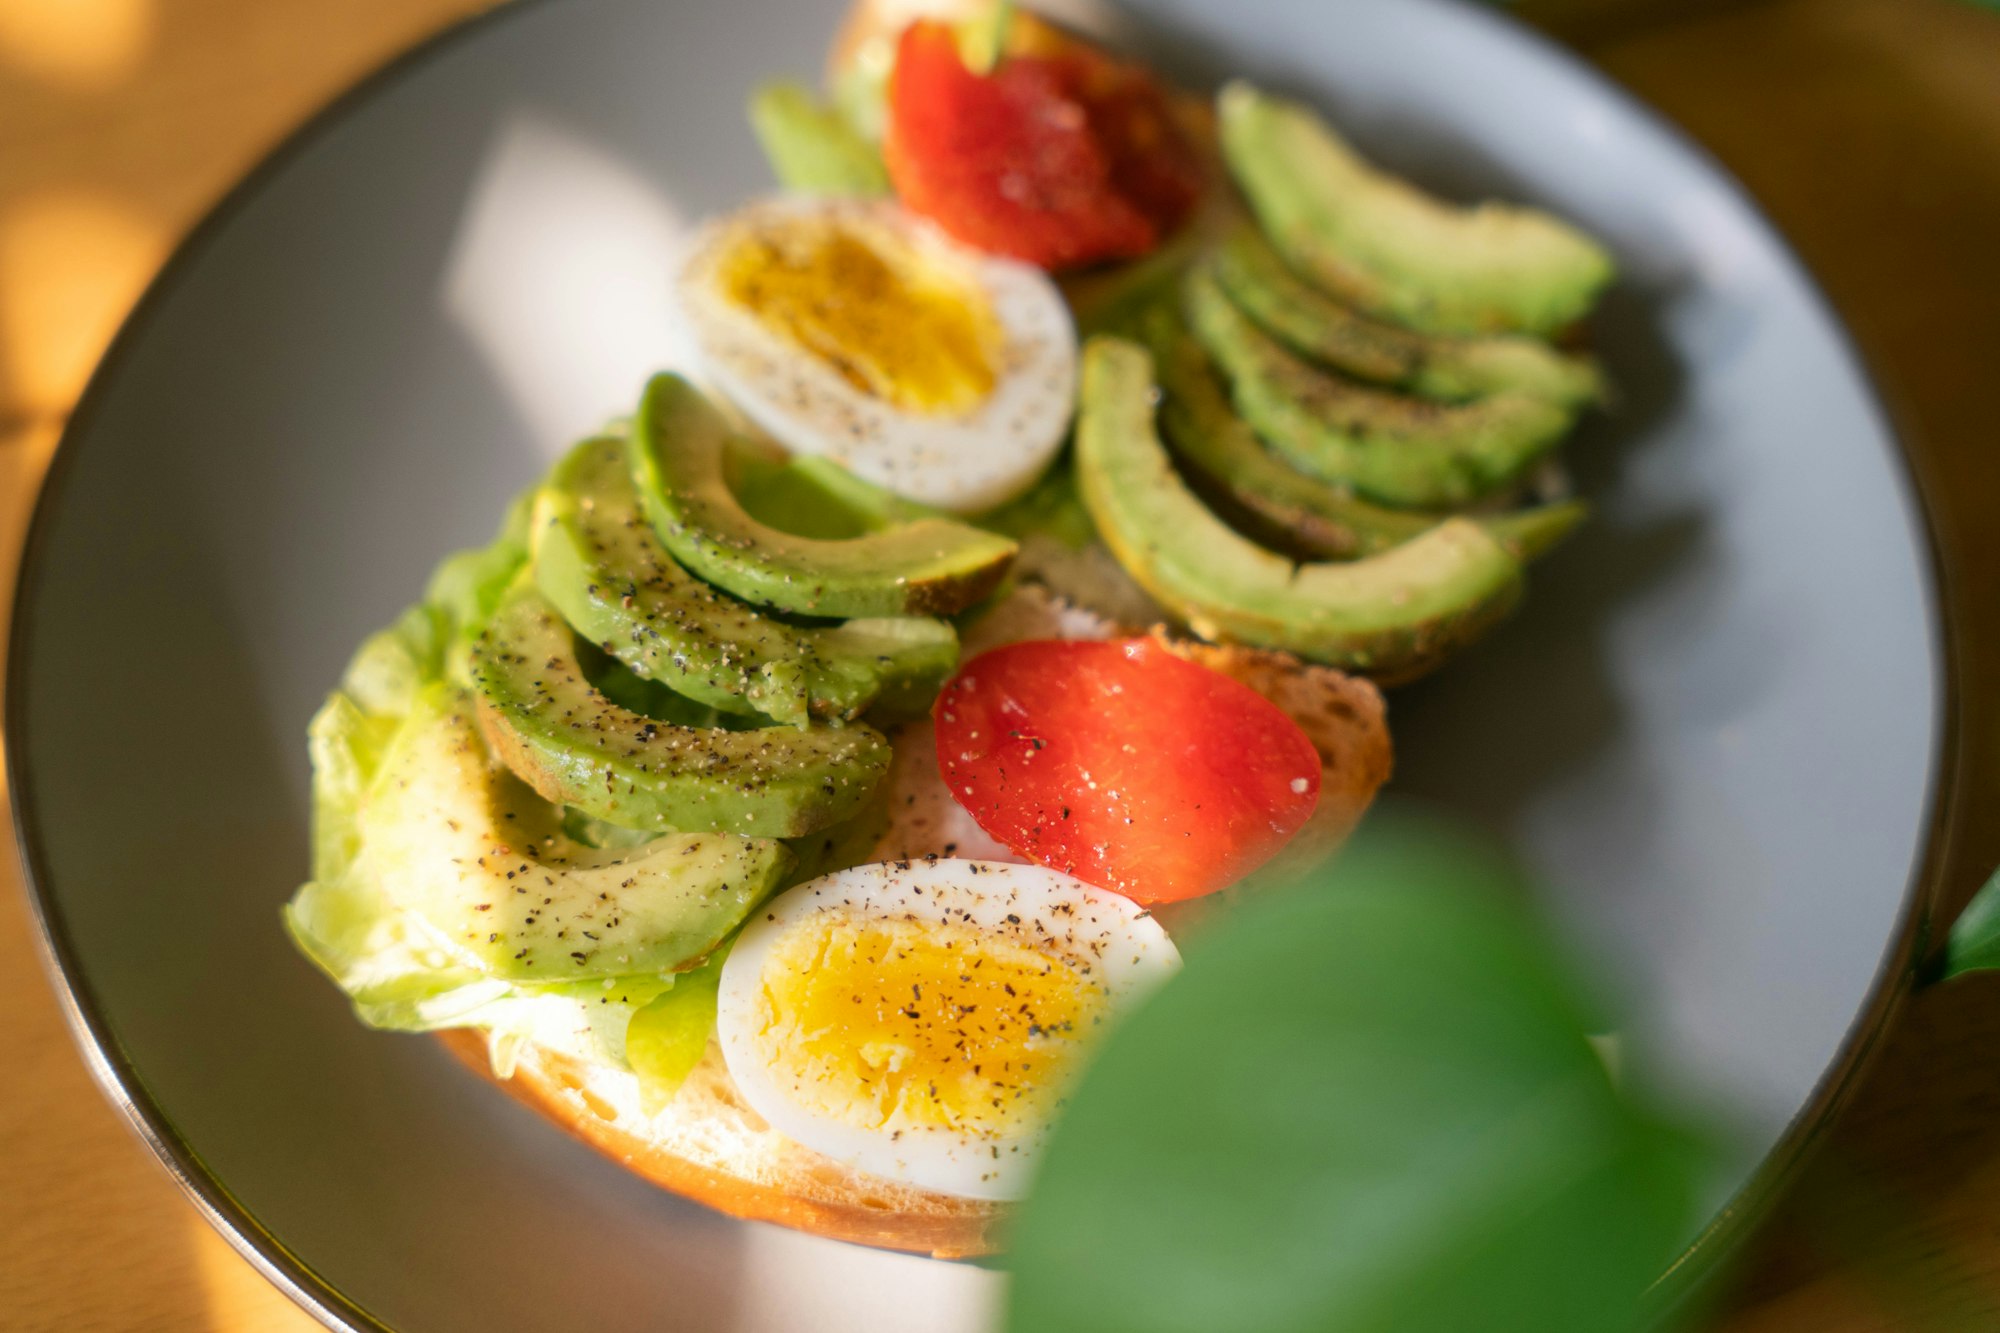 a plate of food with avocado, tomato, and hard boiled eggs